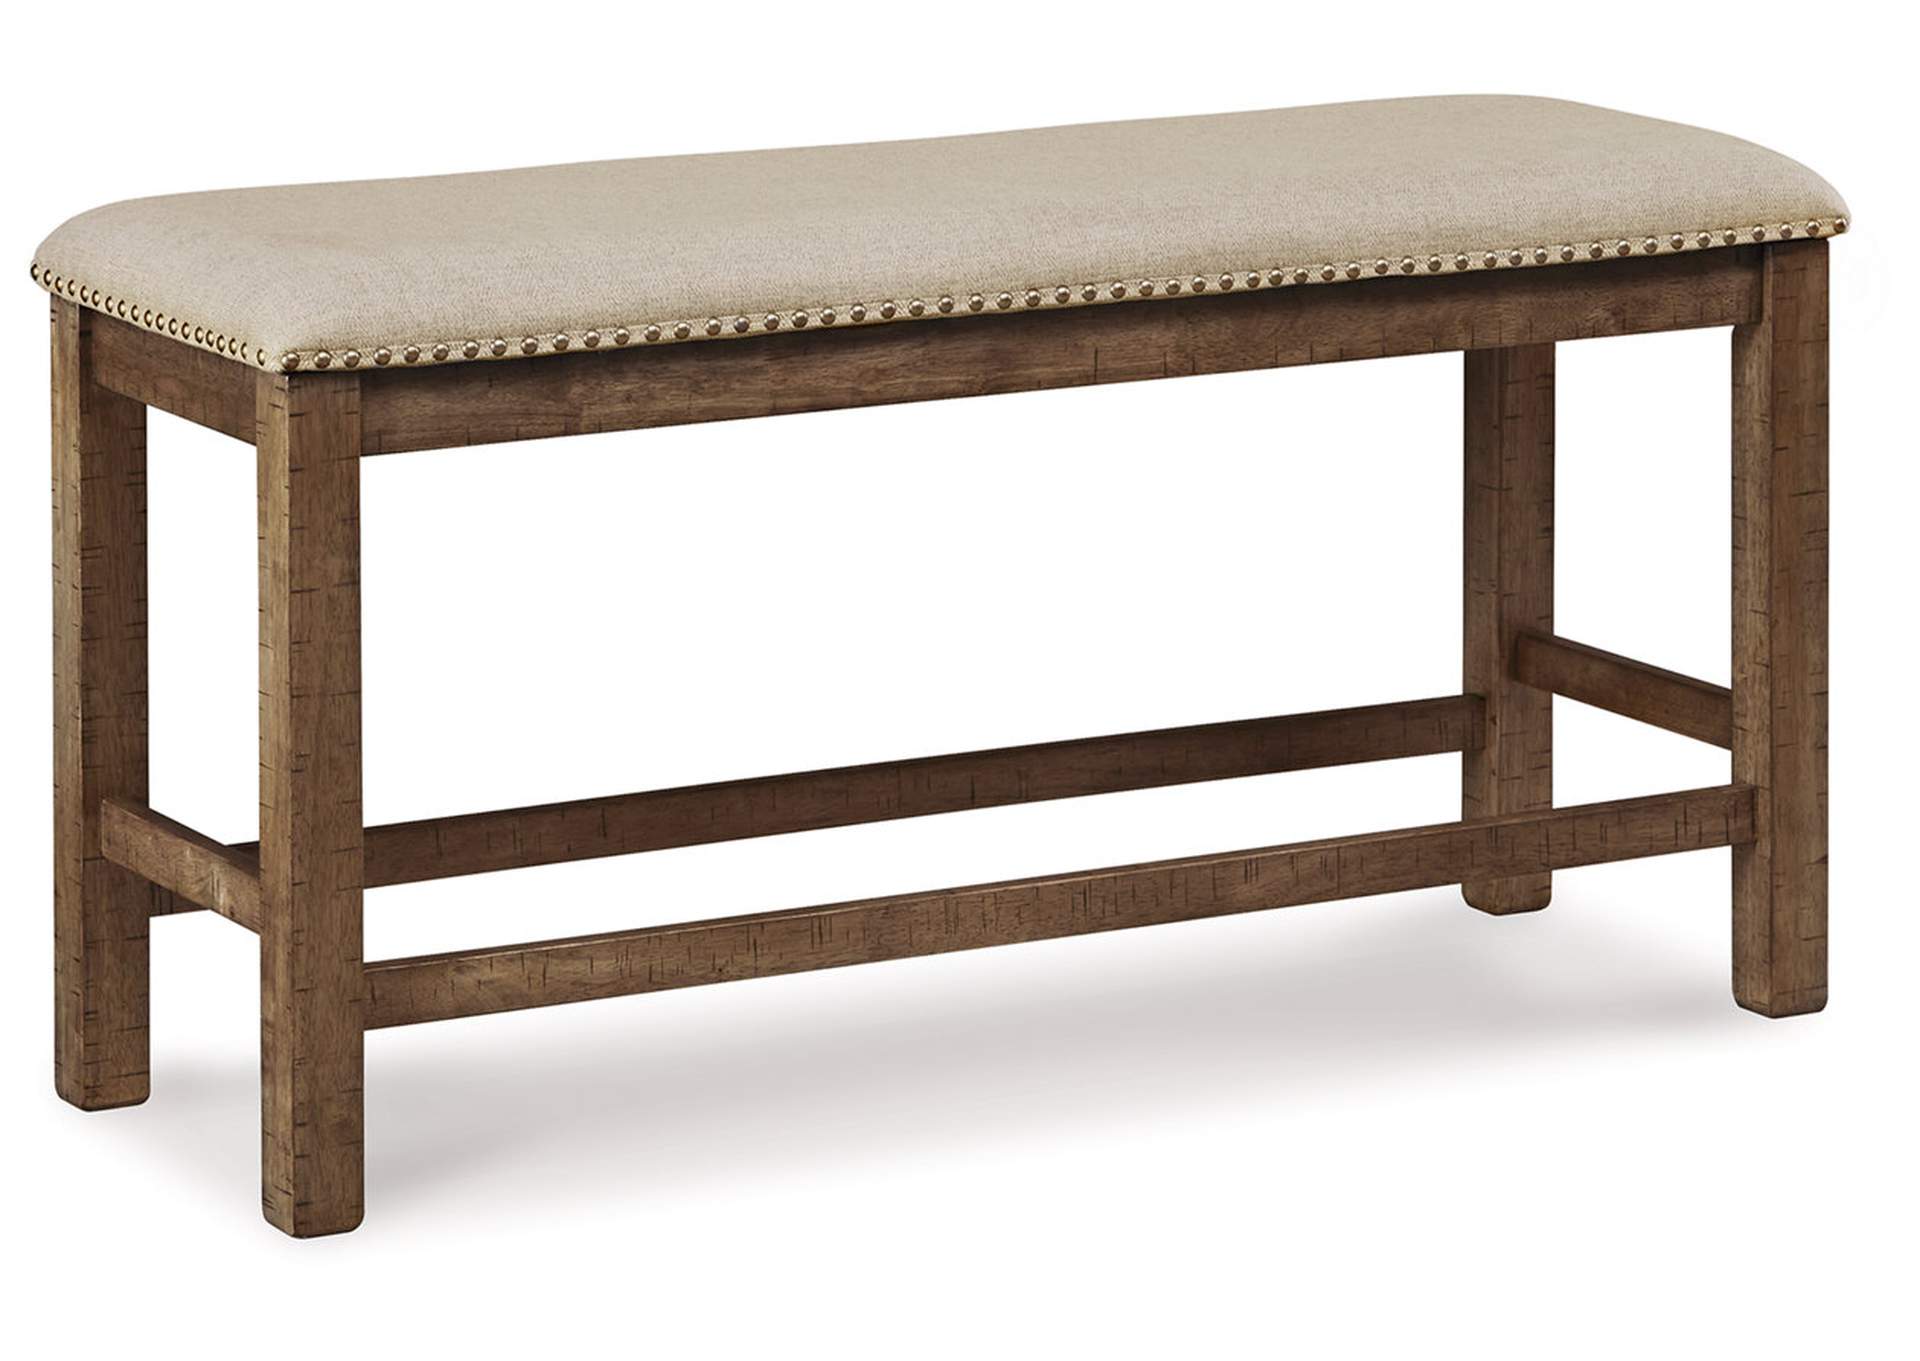 Moriville Counter Height Dining Bench,Signature Design By Ashley